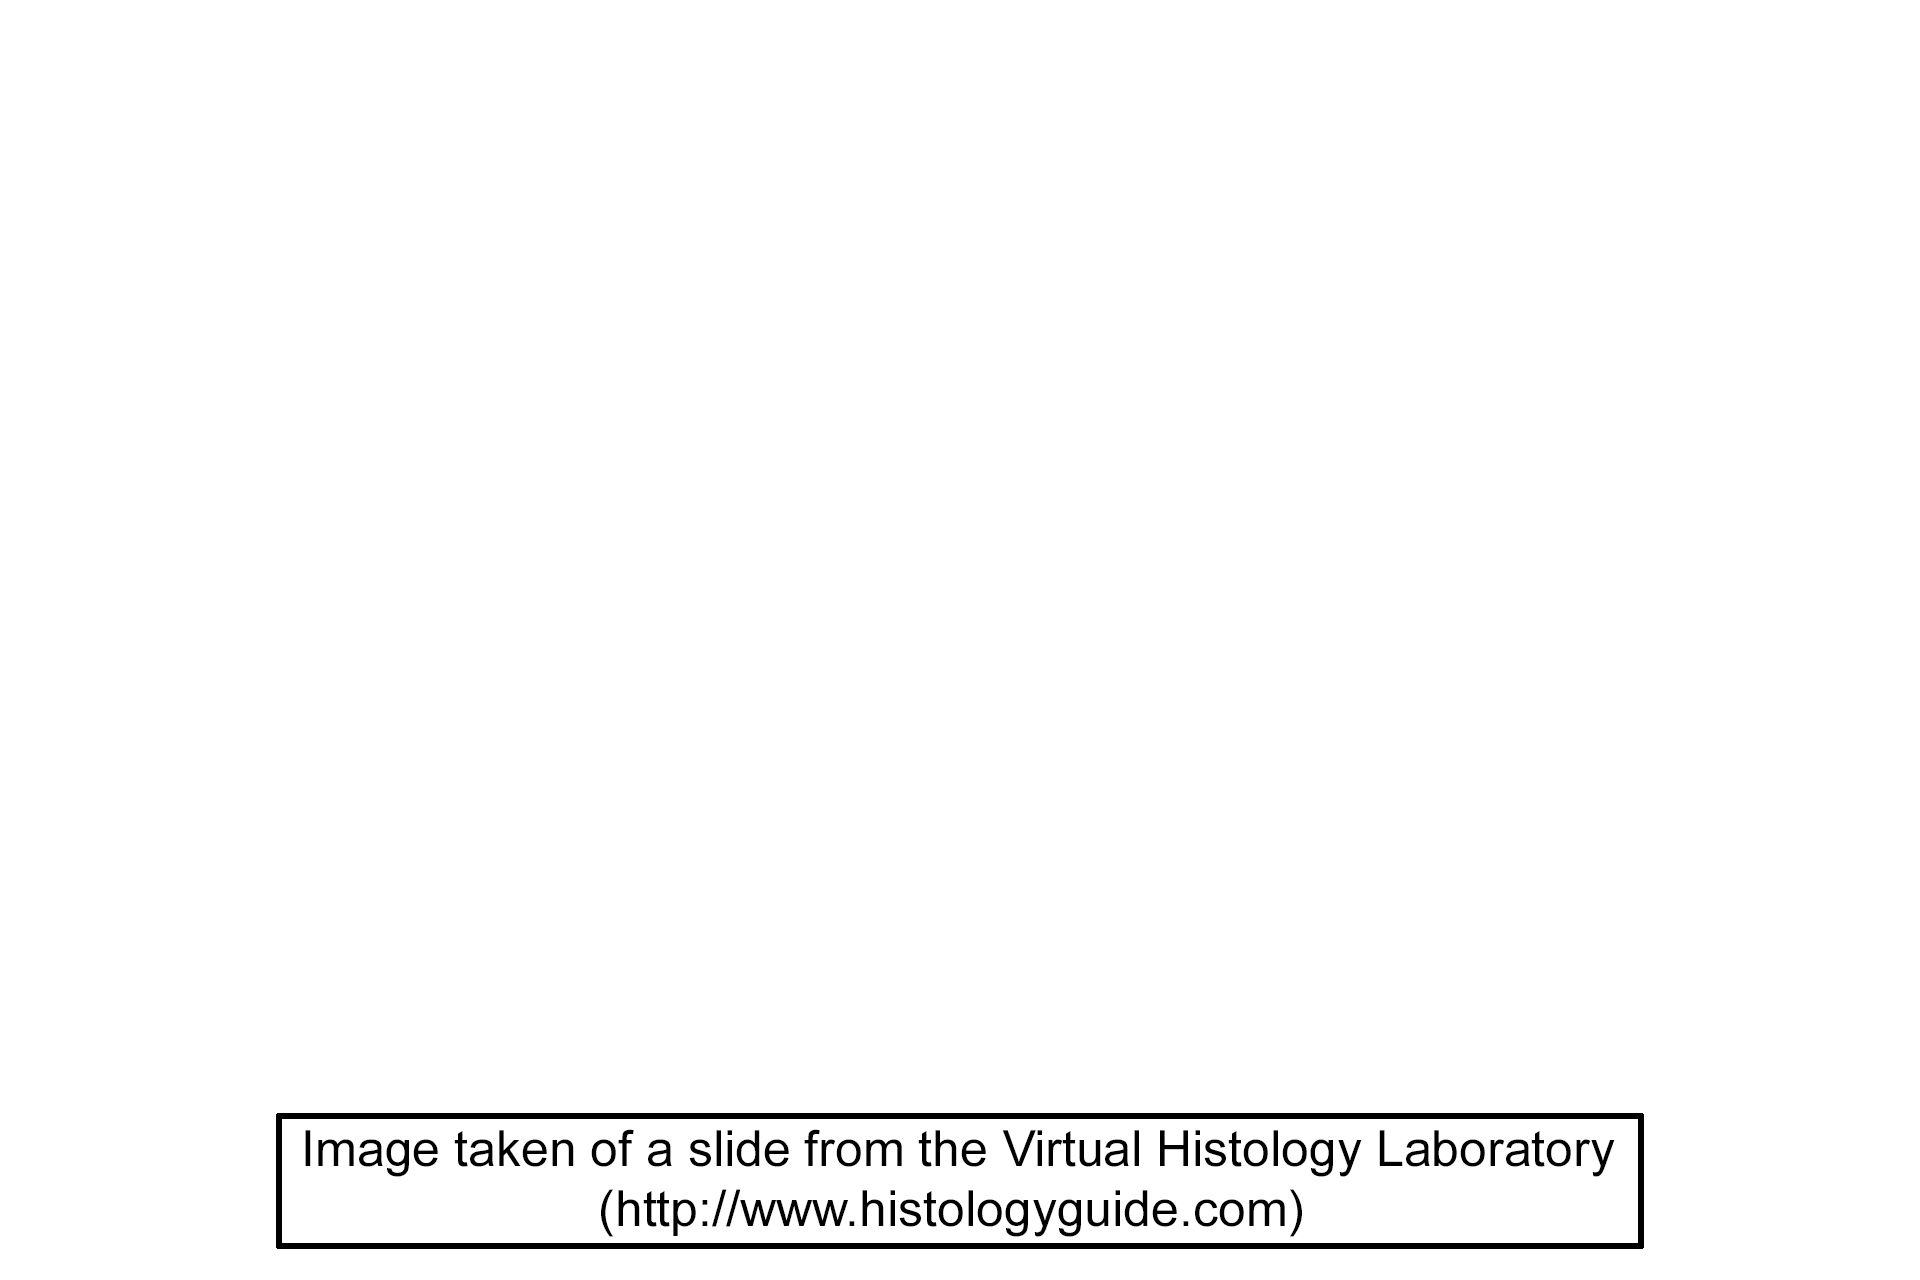 Image source > <p>This images was taken of a slide on the Virtual Microscopy Laboratory website (www.histologyguide.com).</p>
